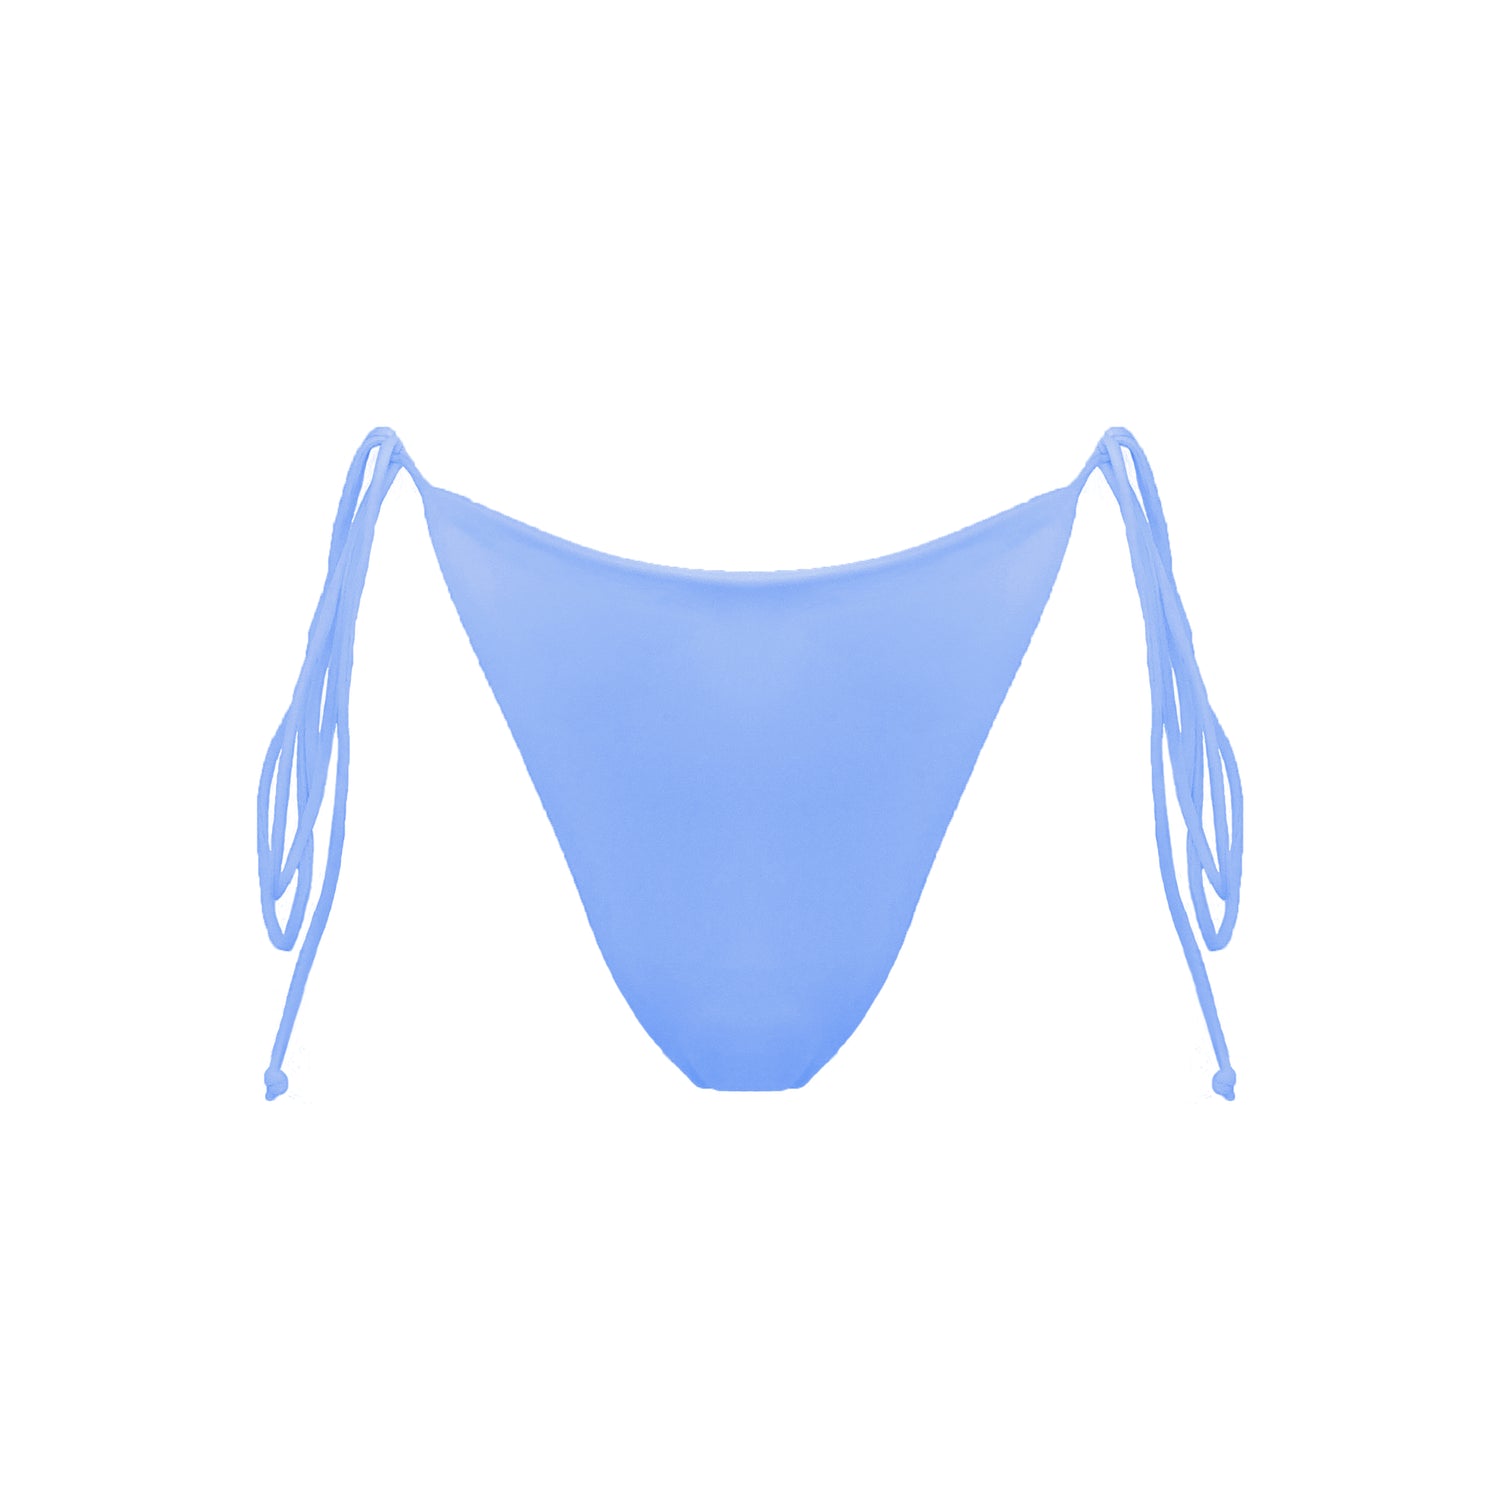 Periwinkle blue Ravello bikini bottom with adjustable side tie straps and cheeky bum coverage.